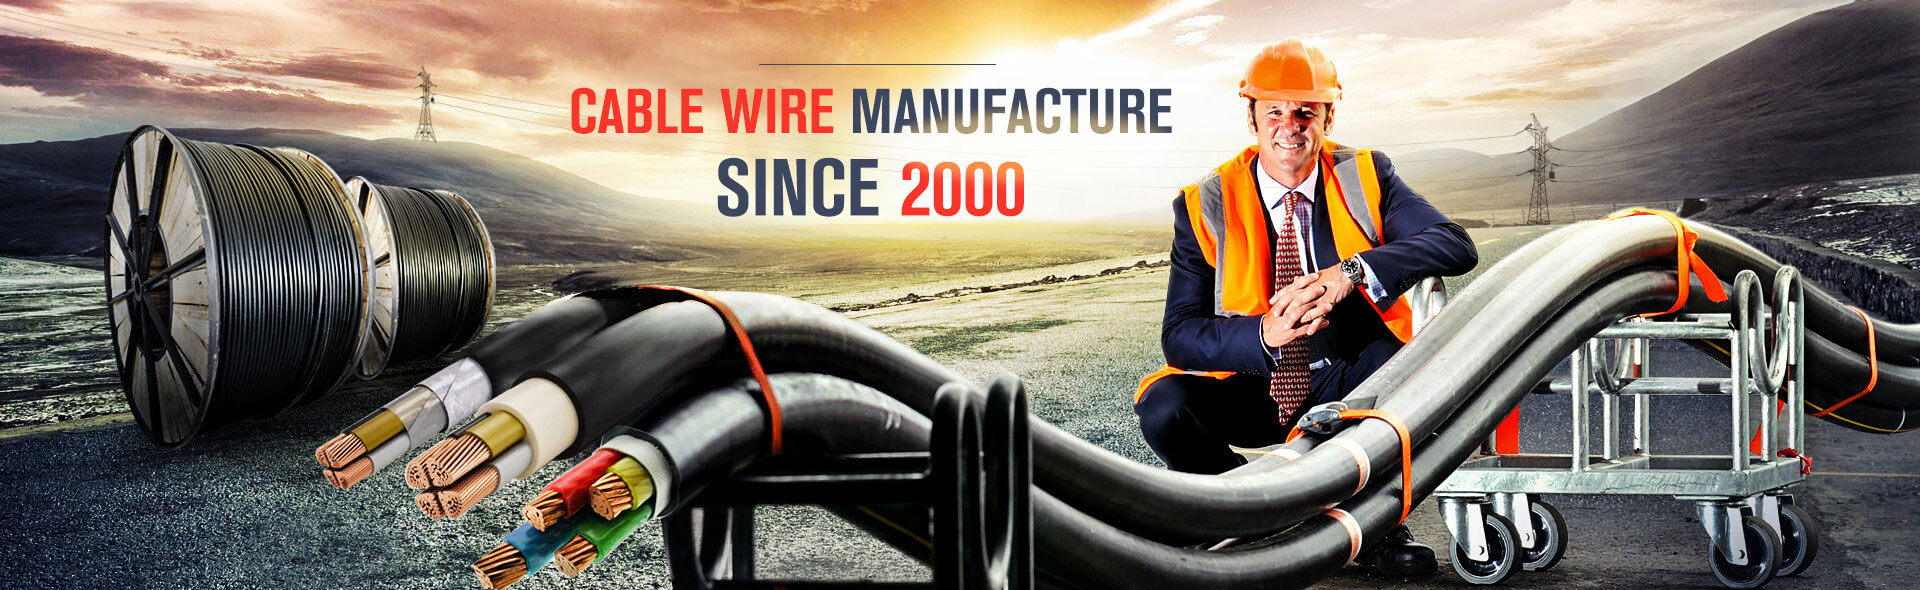 Power cable manufacturing